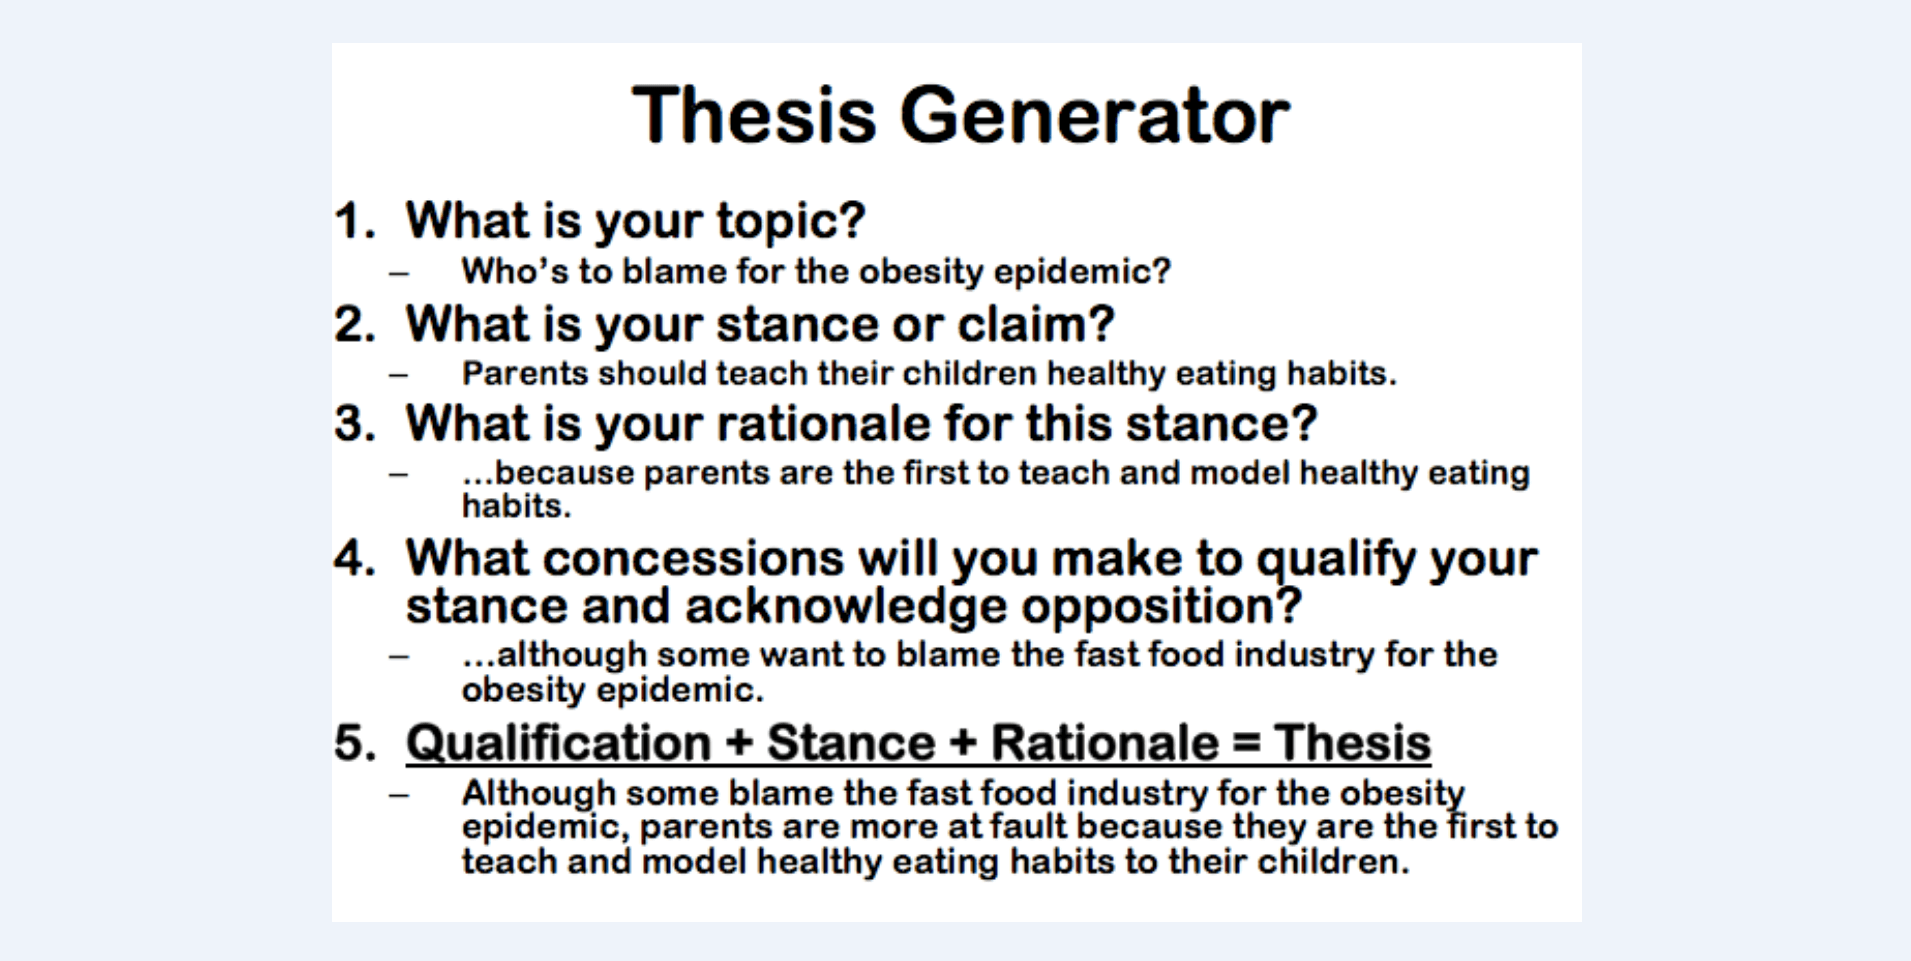 thesis statement generator from question